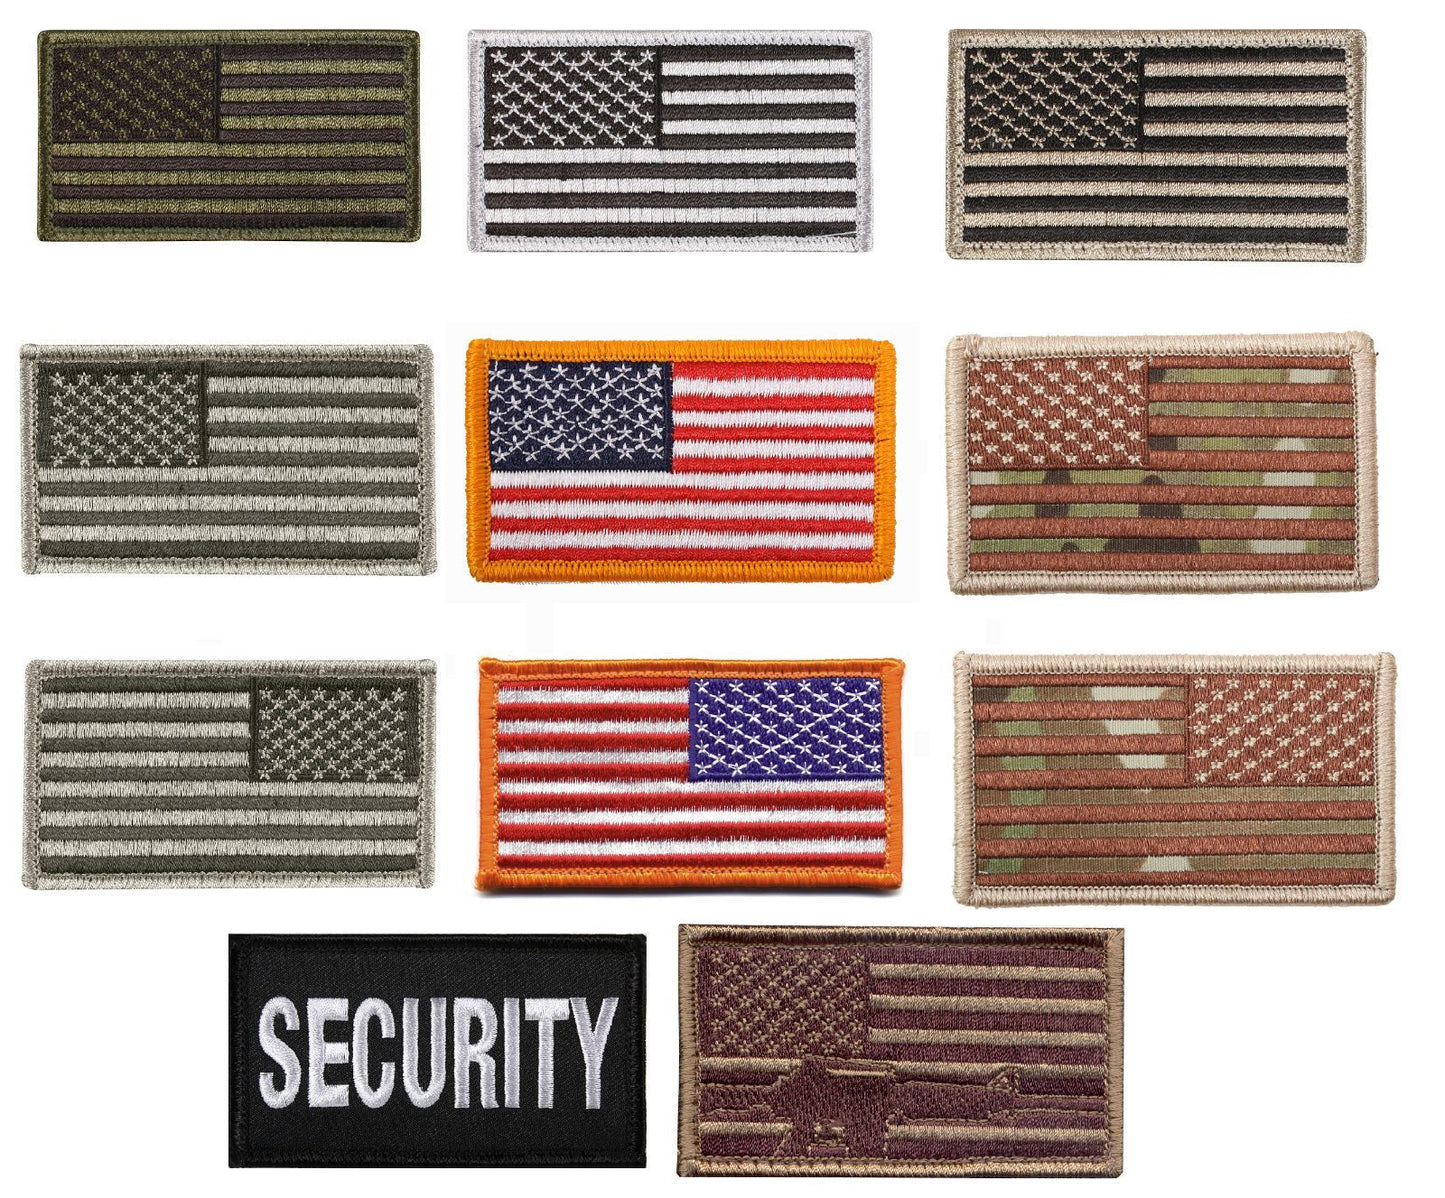 American Flag Patch with Velcro Backing